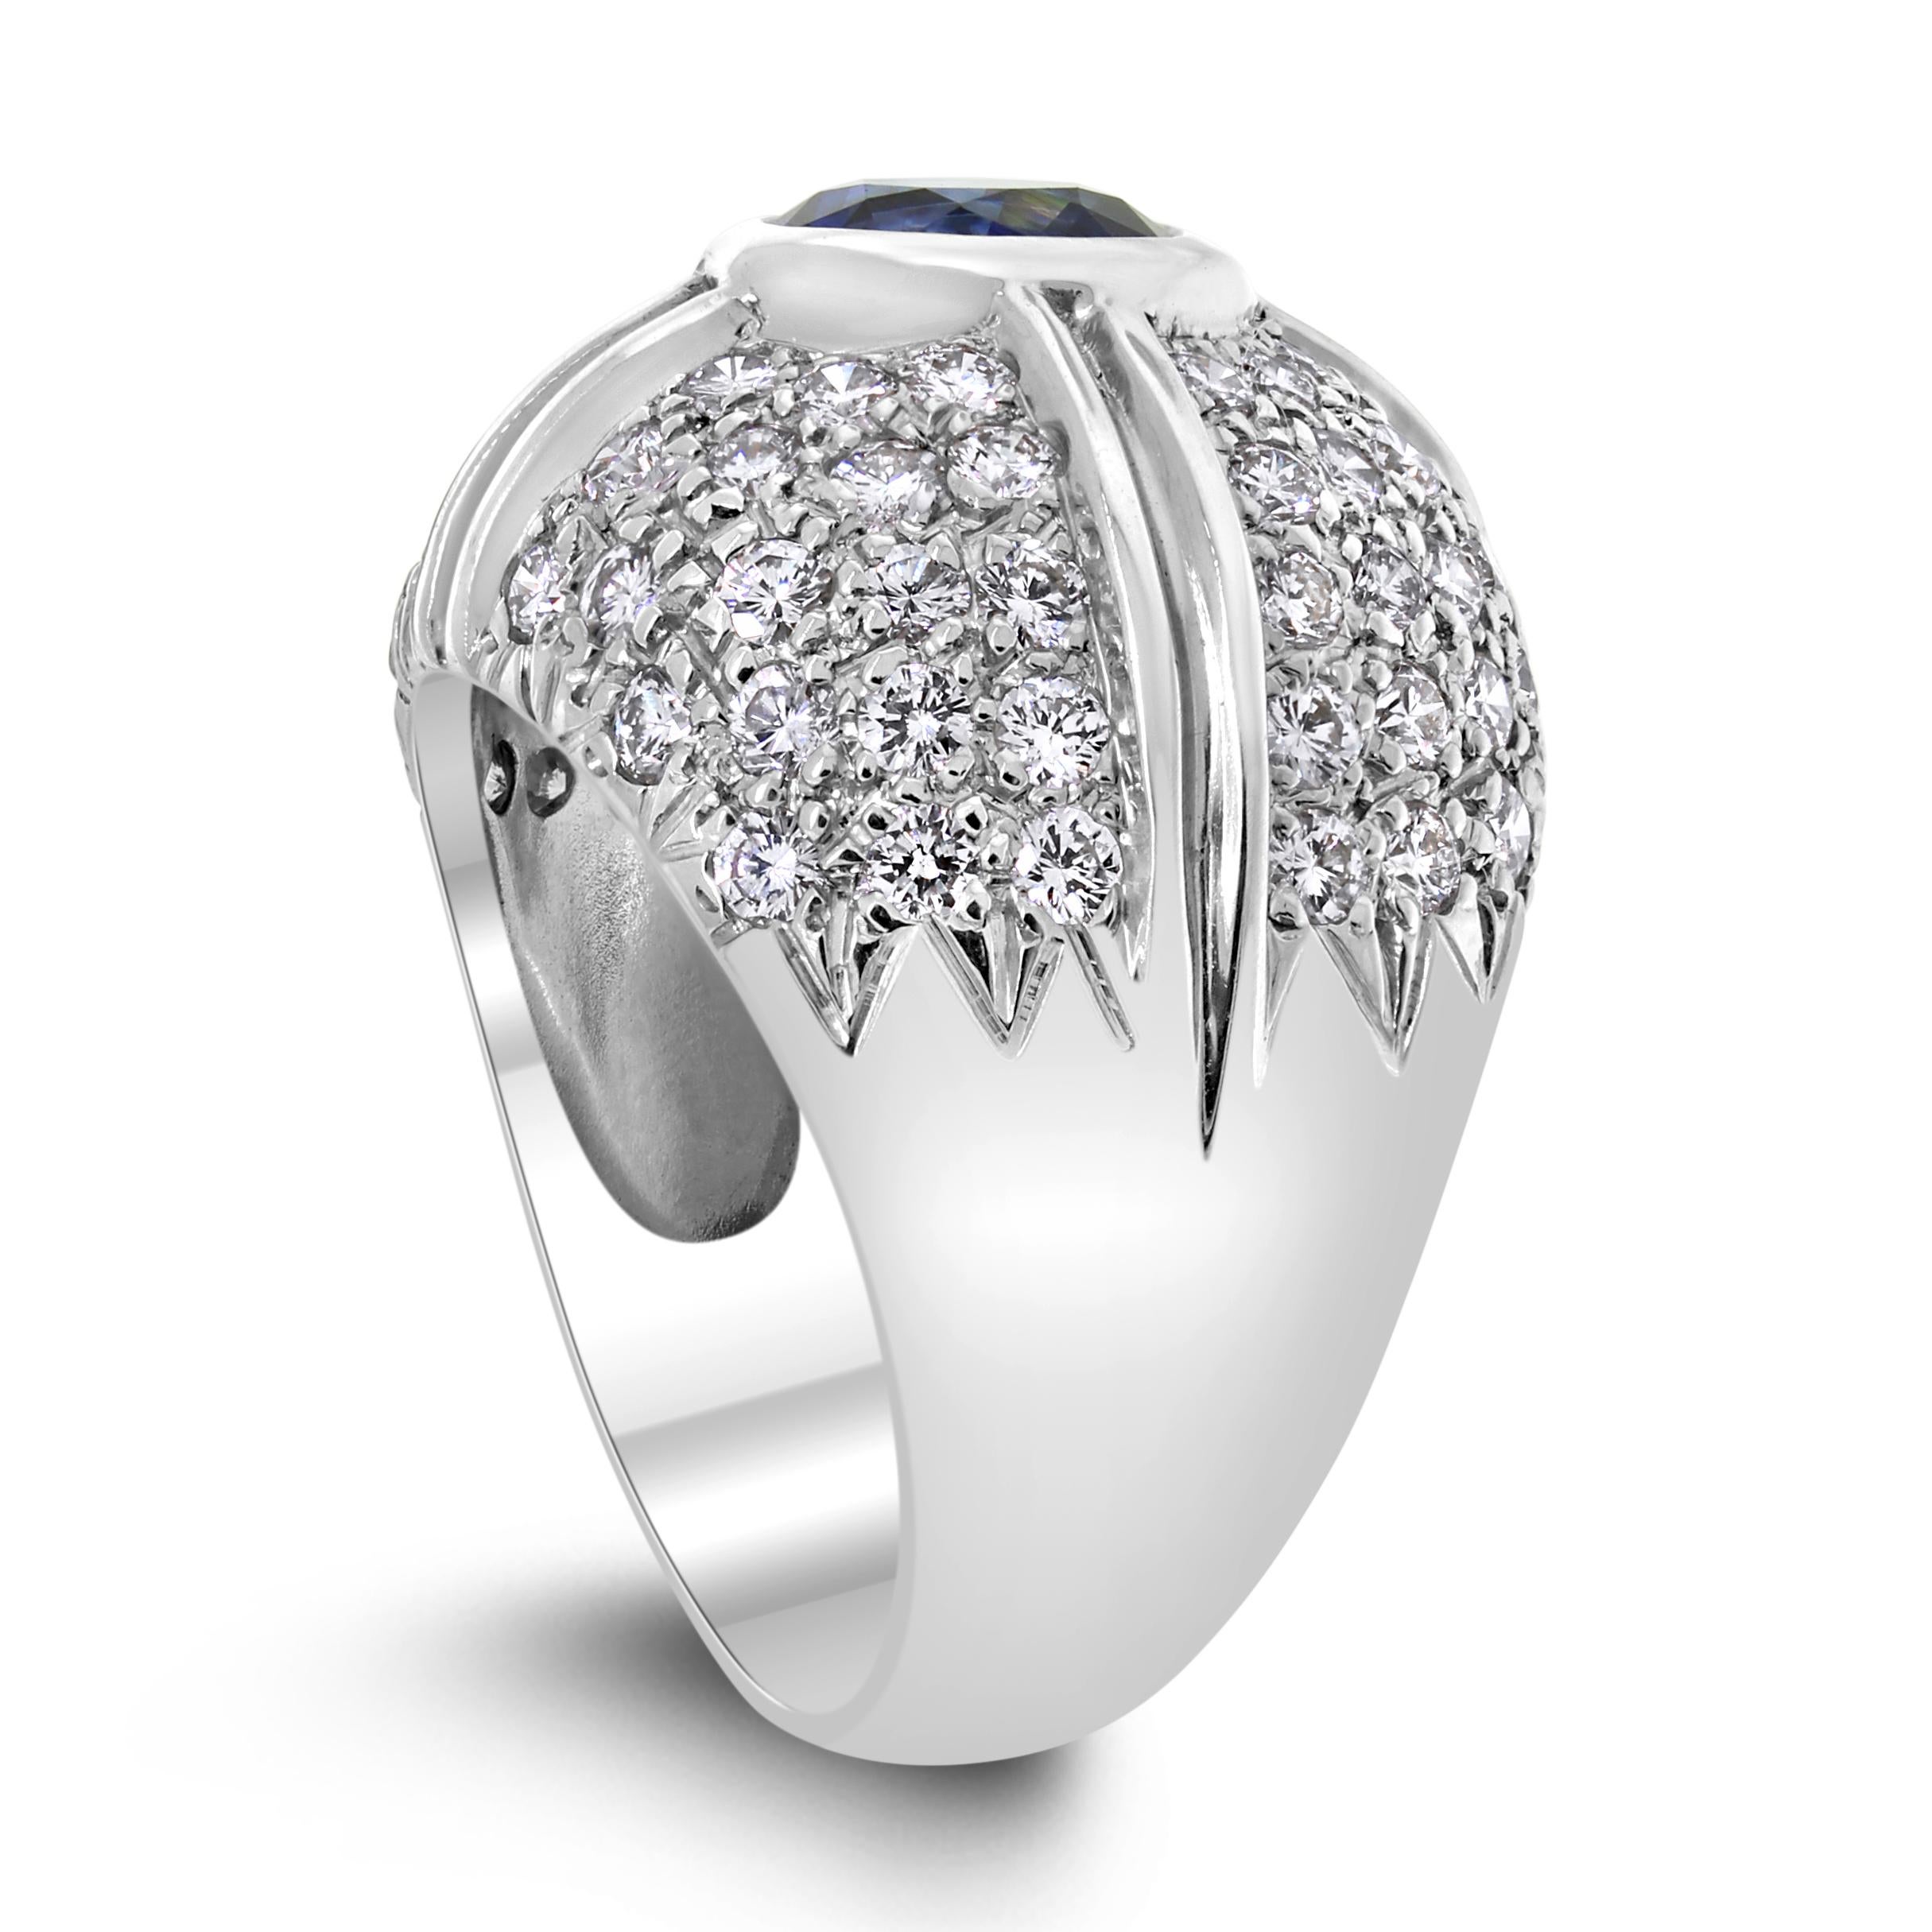 The night Sapphire at the center of this sectioned ring gives it a soft yet architectural feel.

Gemstones Type: Sapphire 
Gemstones Shape: Oval 
Gemstones Weight: 1.80 ct 
Gemstones Color: Blue 
Gemstones Clarity: AAA 

Diamonds Shape: Round 
Side